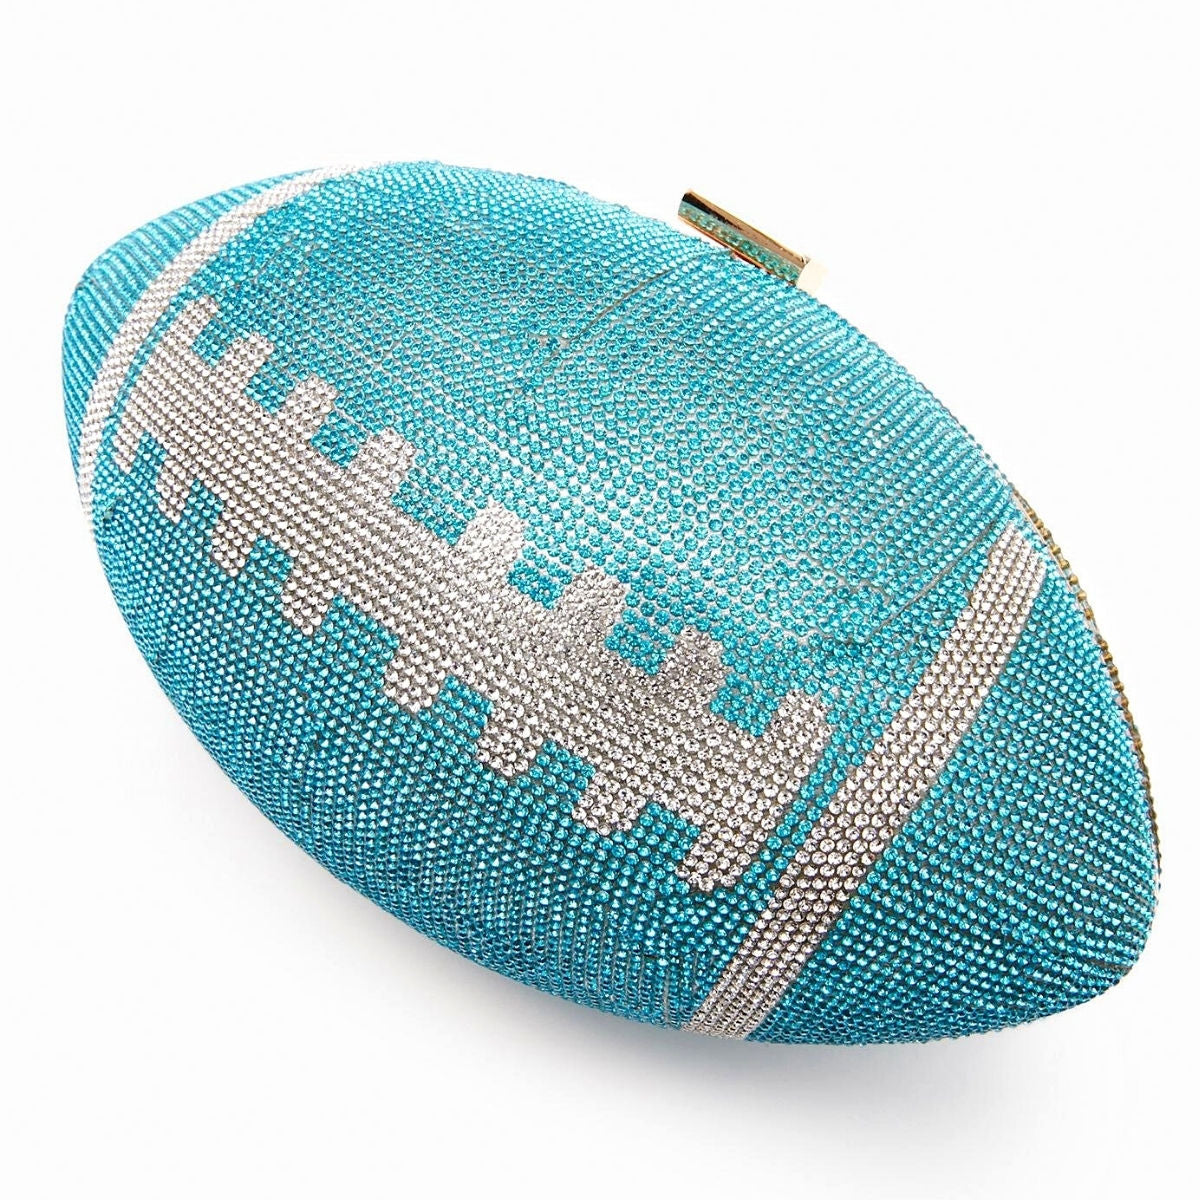 Turquoise Bling Football Clutch